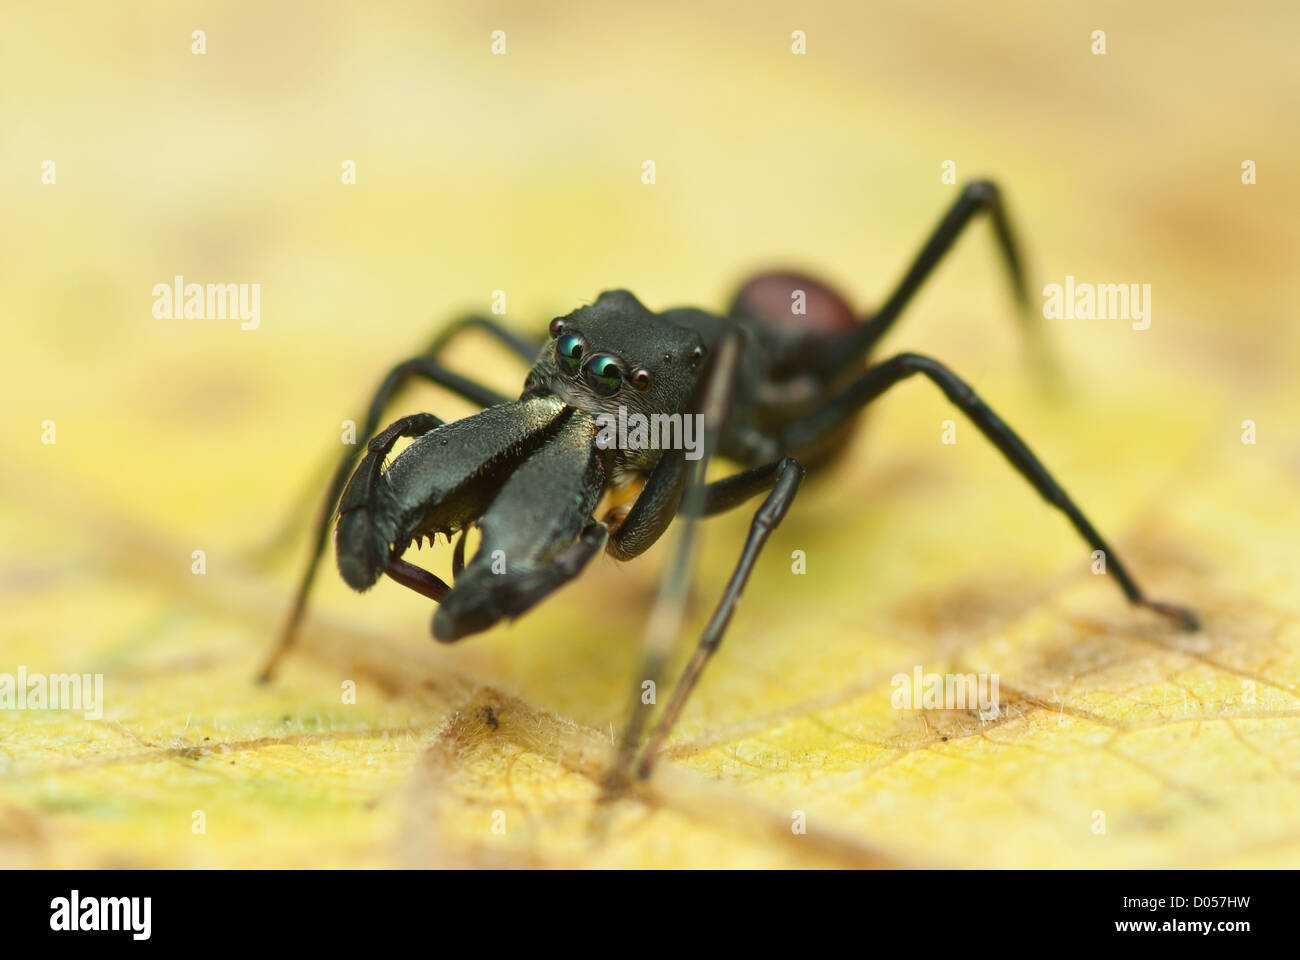 Macro Photos Frame an Ant-Mimicking Jumping Spider that Radiates an  Iridescent Sheen — Colossal